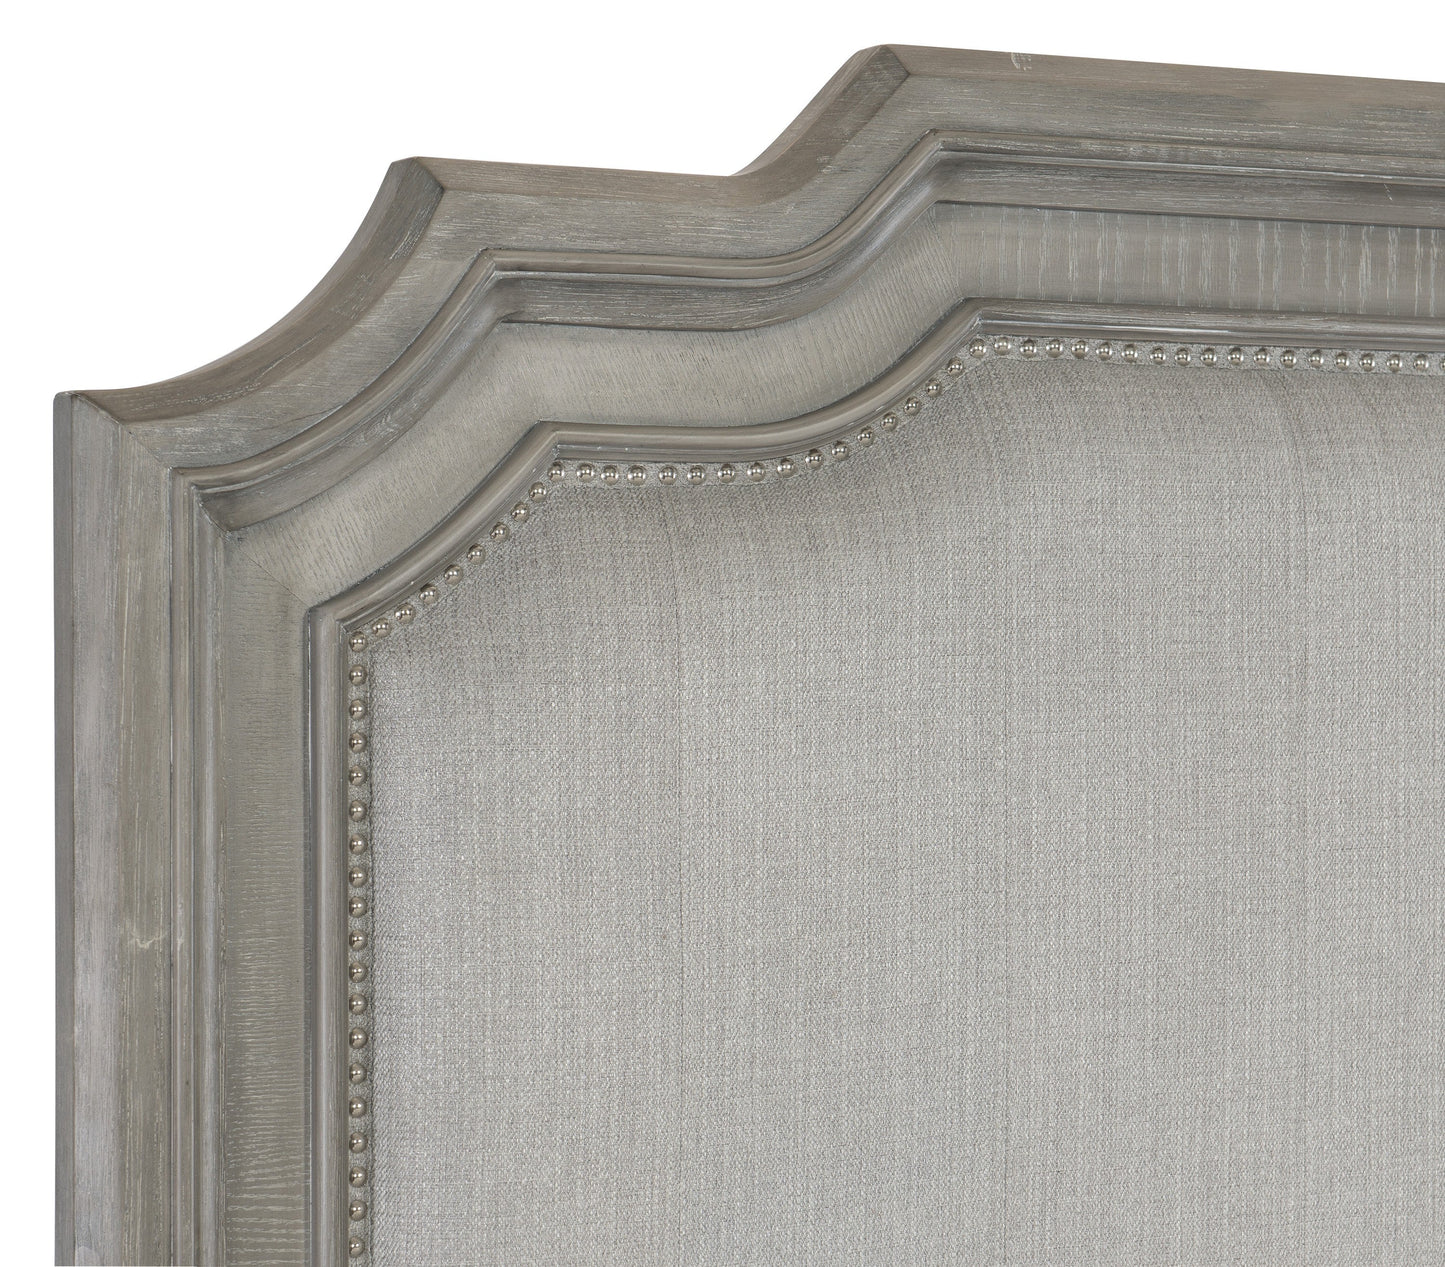 Colchester Gray Queen Upholstered Panel Bed